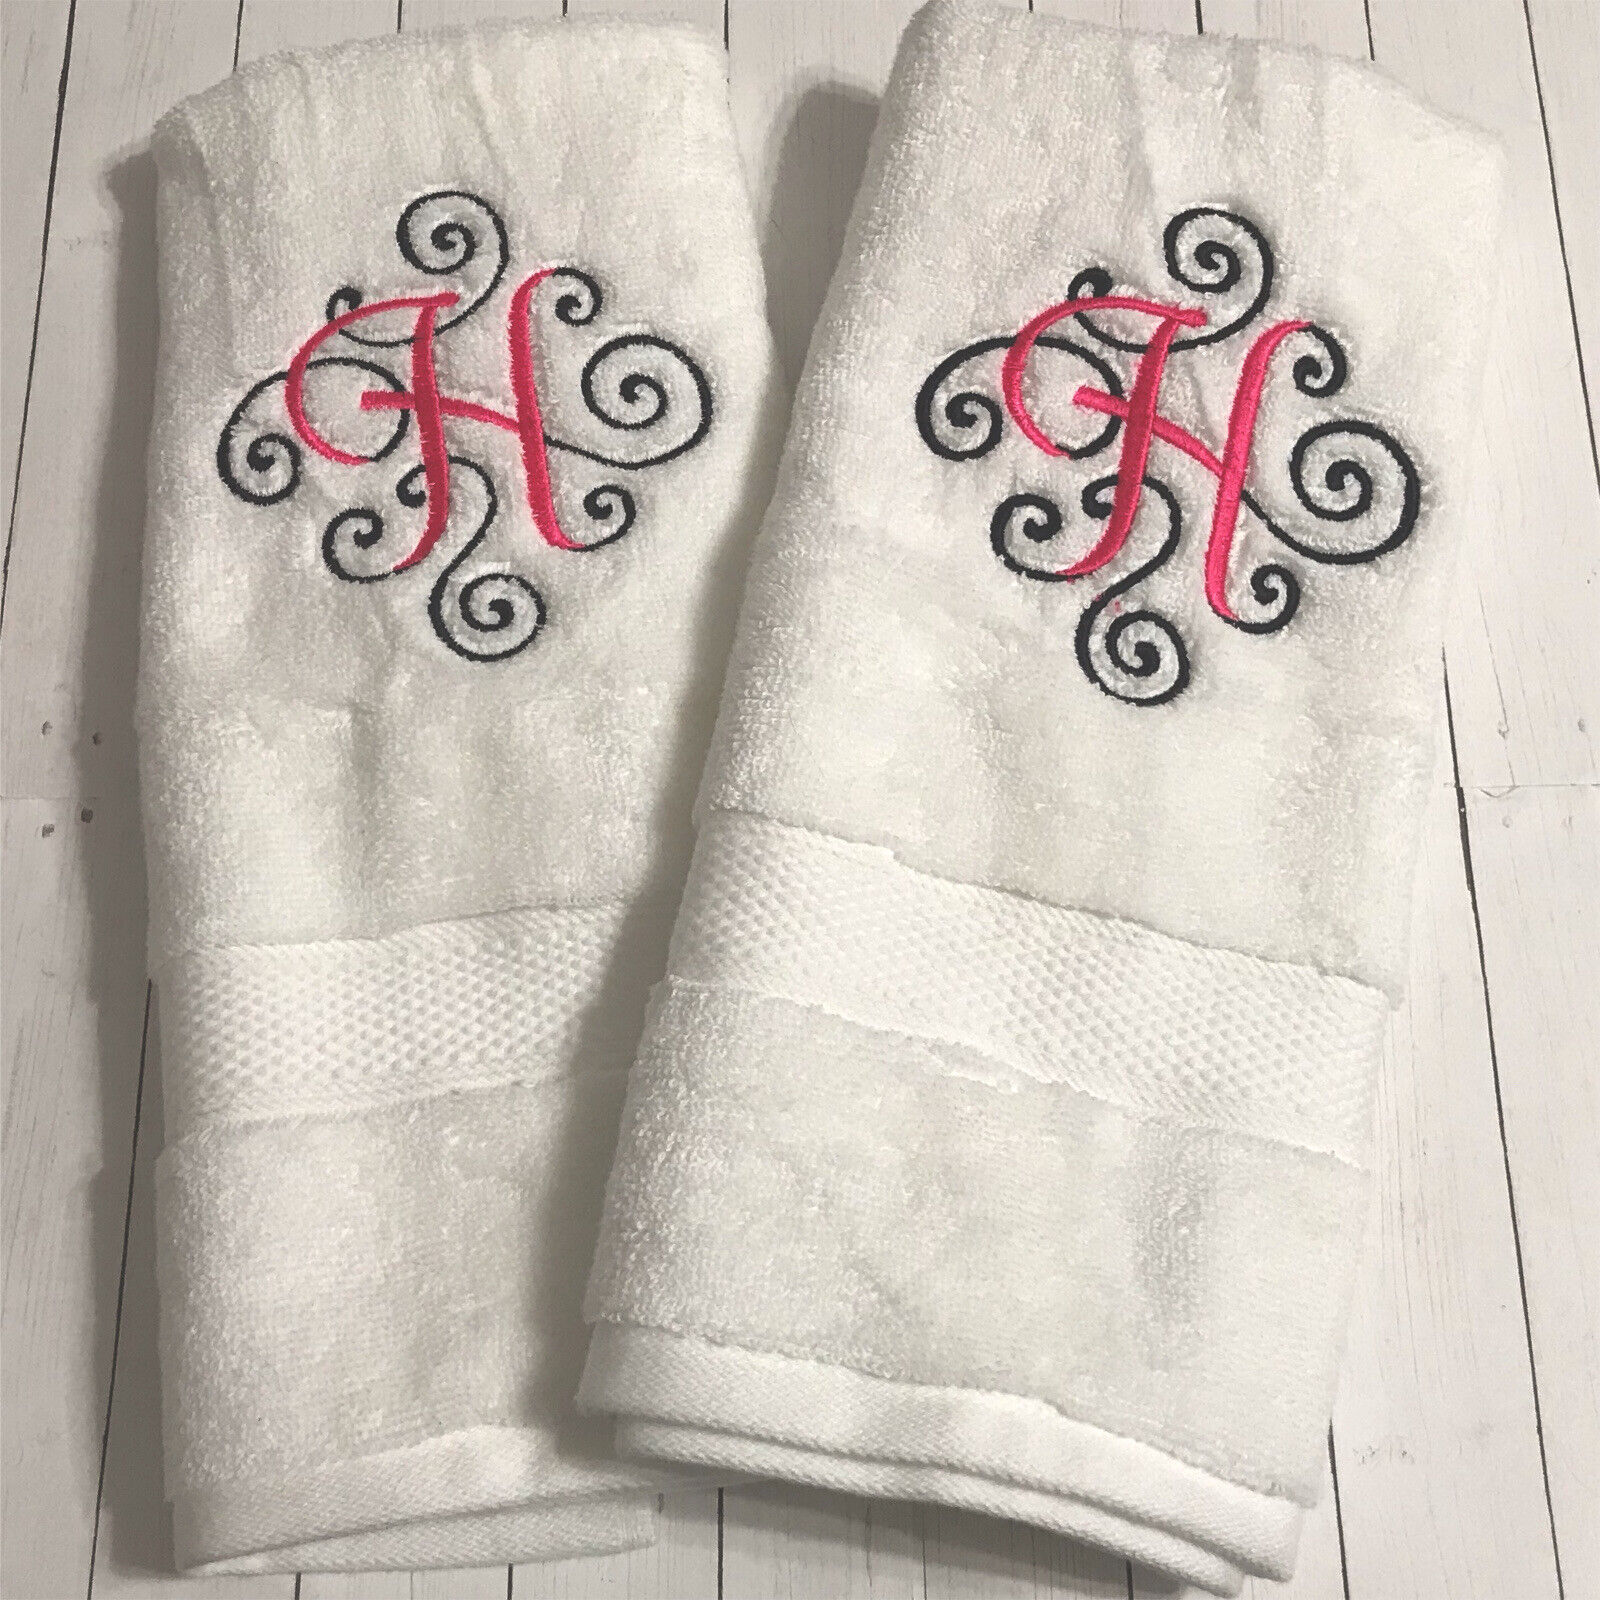 Personalized hand towel set